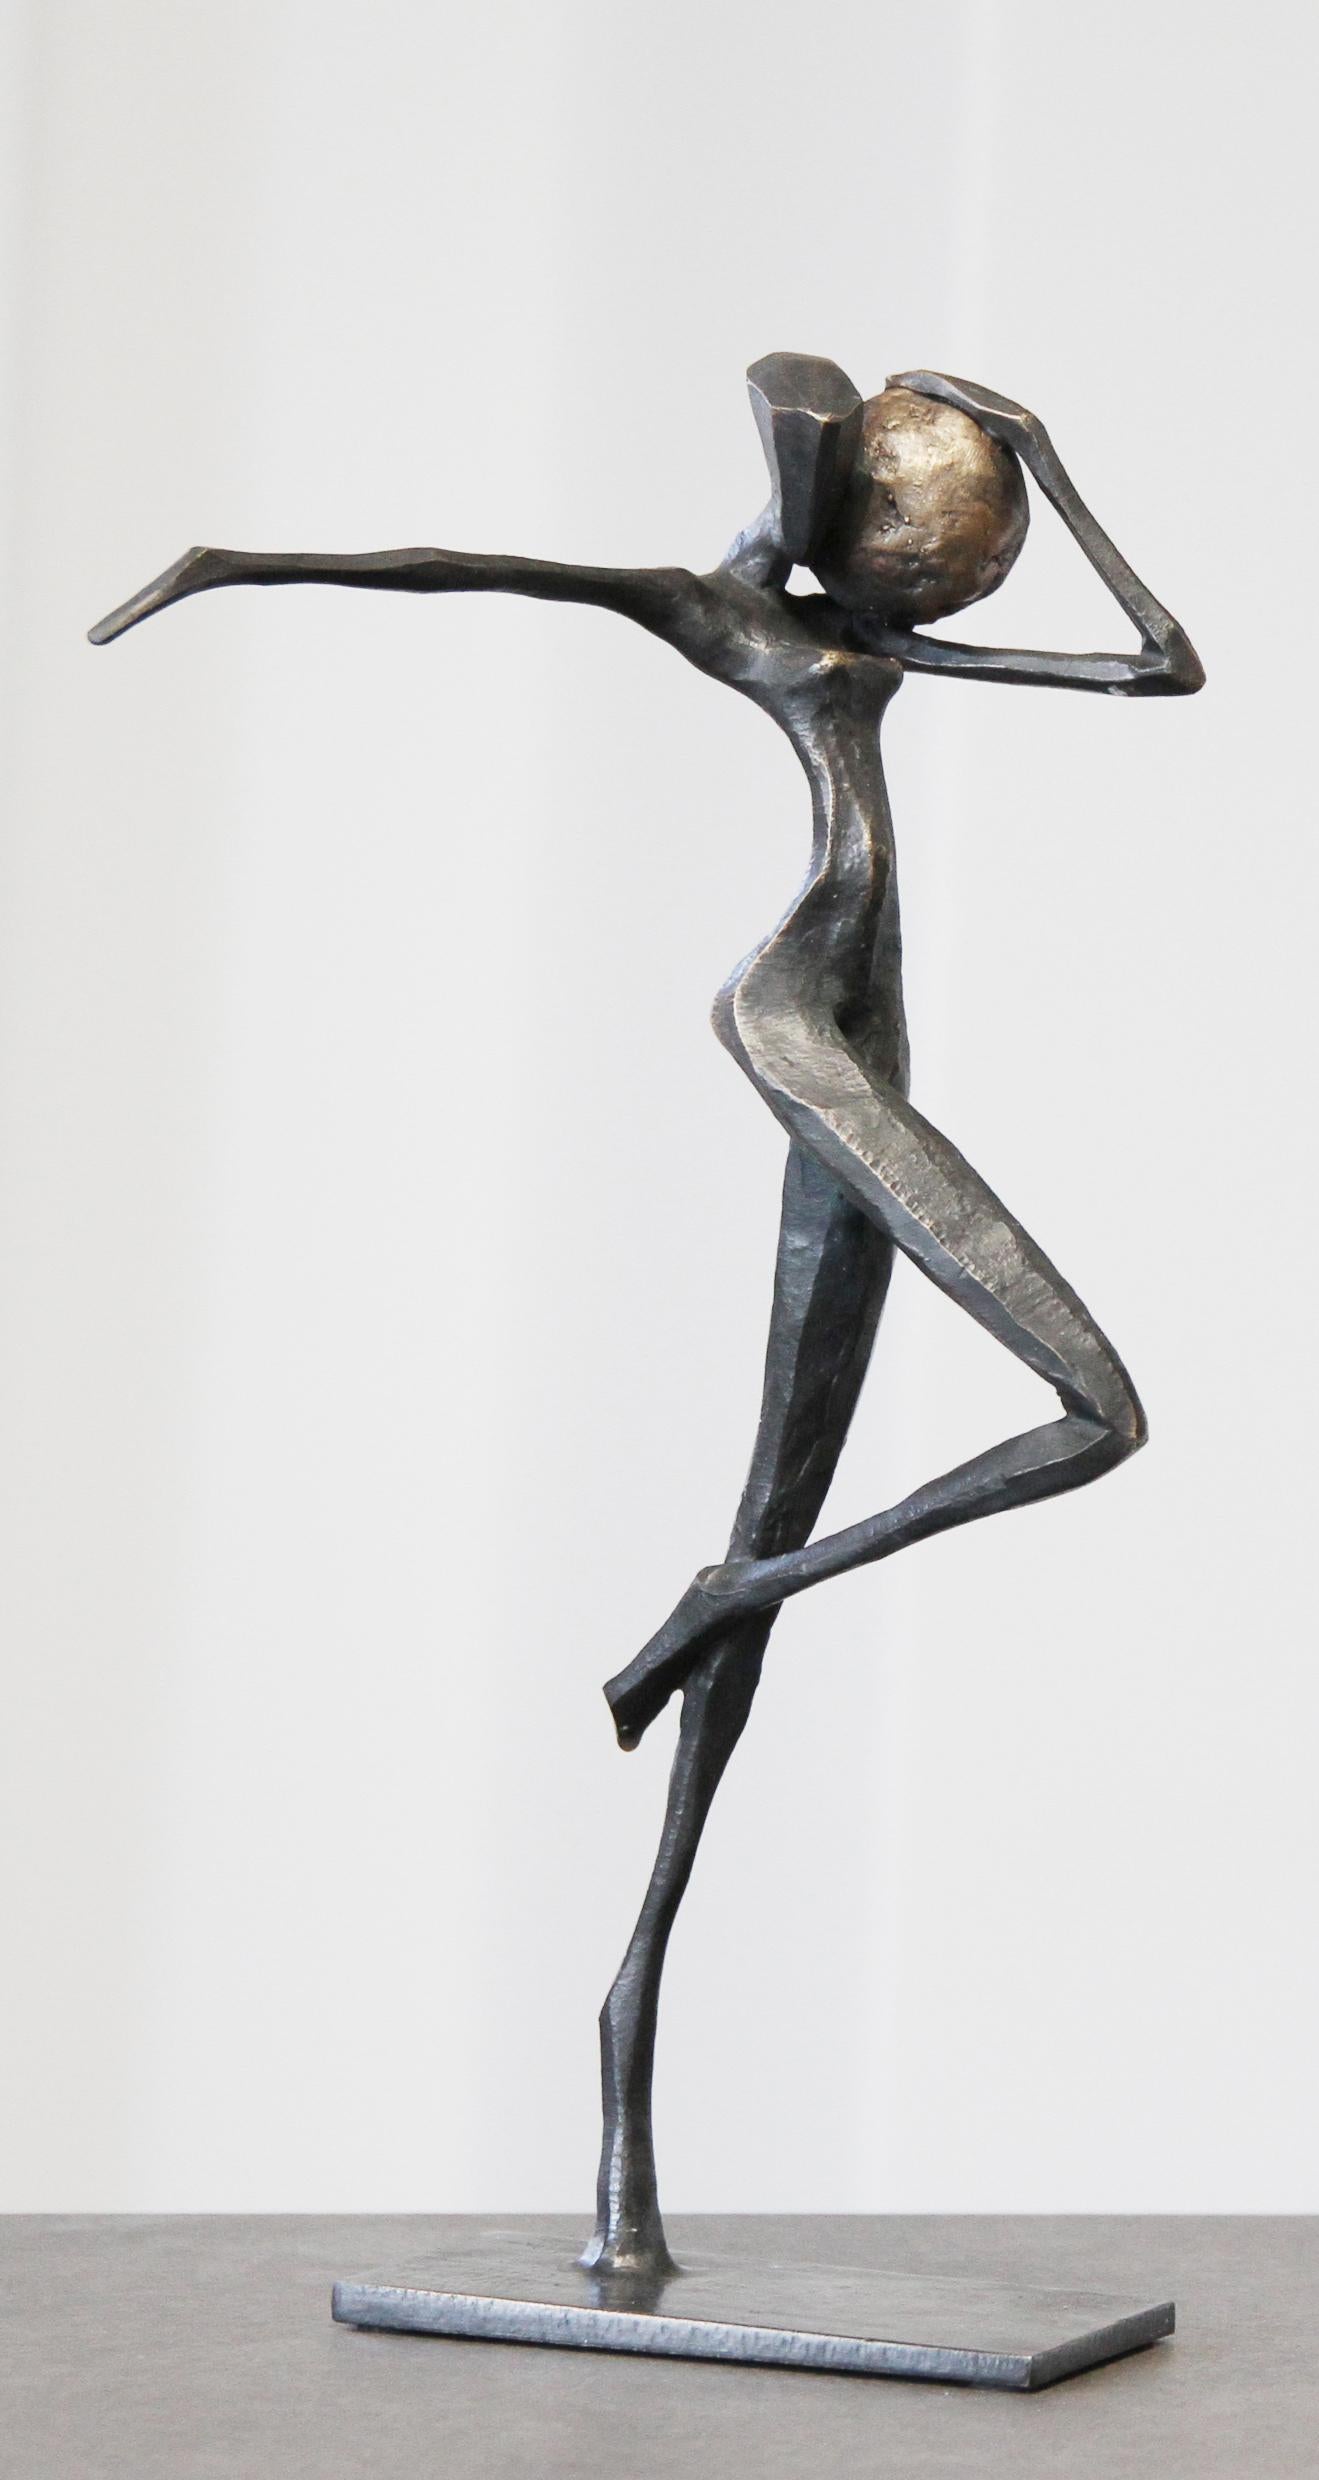 Gaea is an elegant figurative bronze sculpture by Nando Kallweit.

Modelled on modern youthful postures but with a nod to the importance of heritage through the stylised Egyptian-influenced head. A lovely piece on its own or with a group of